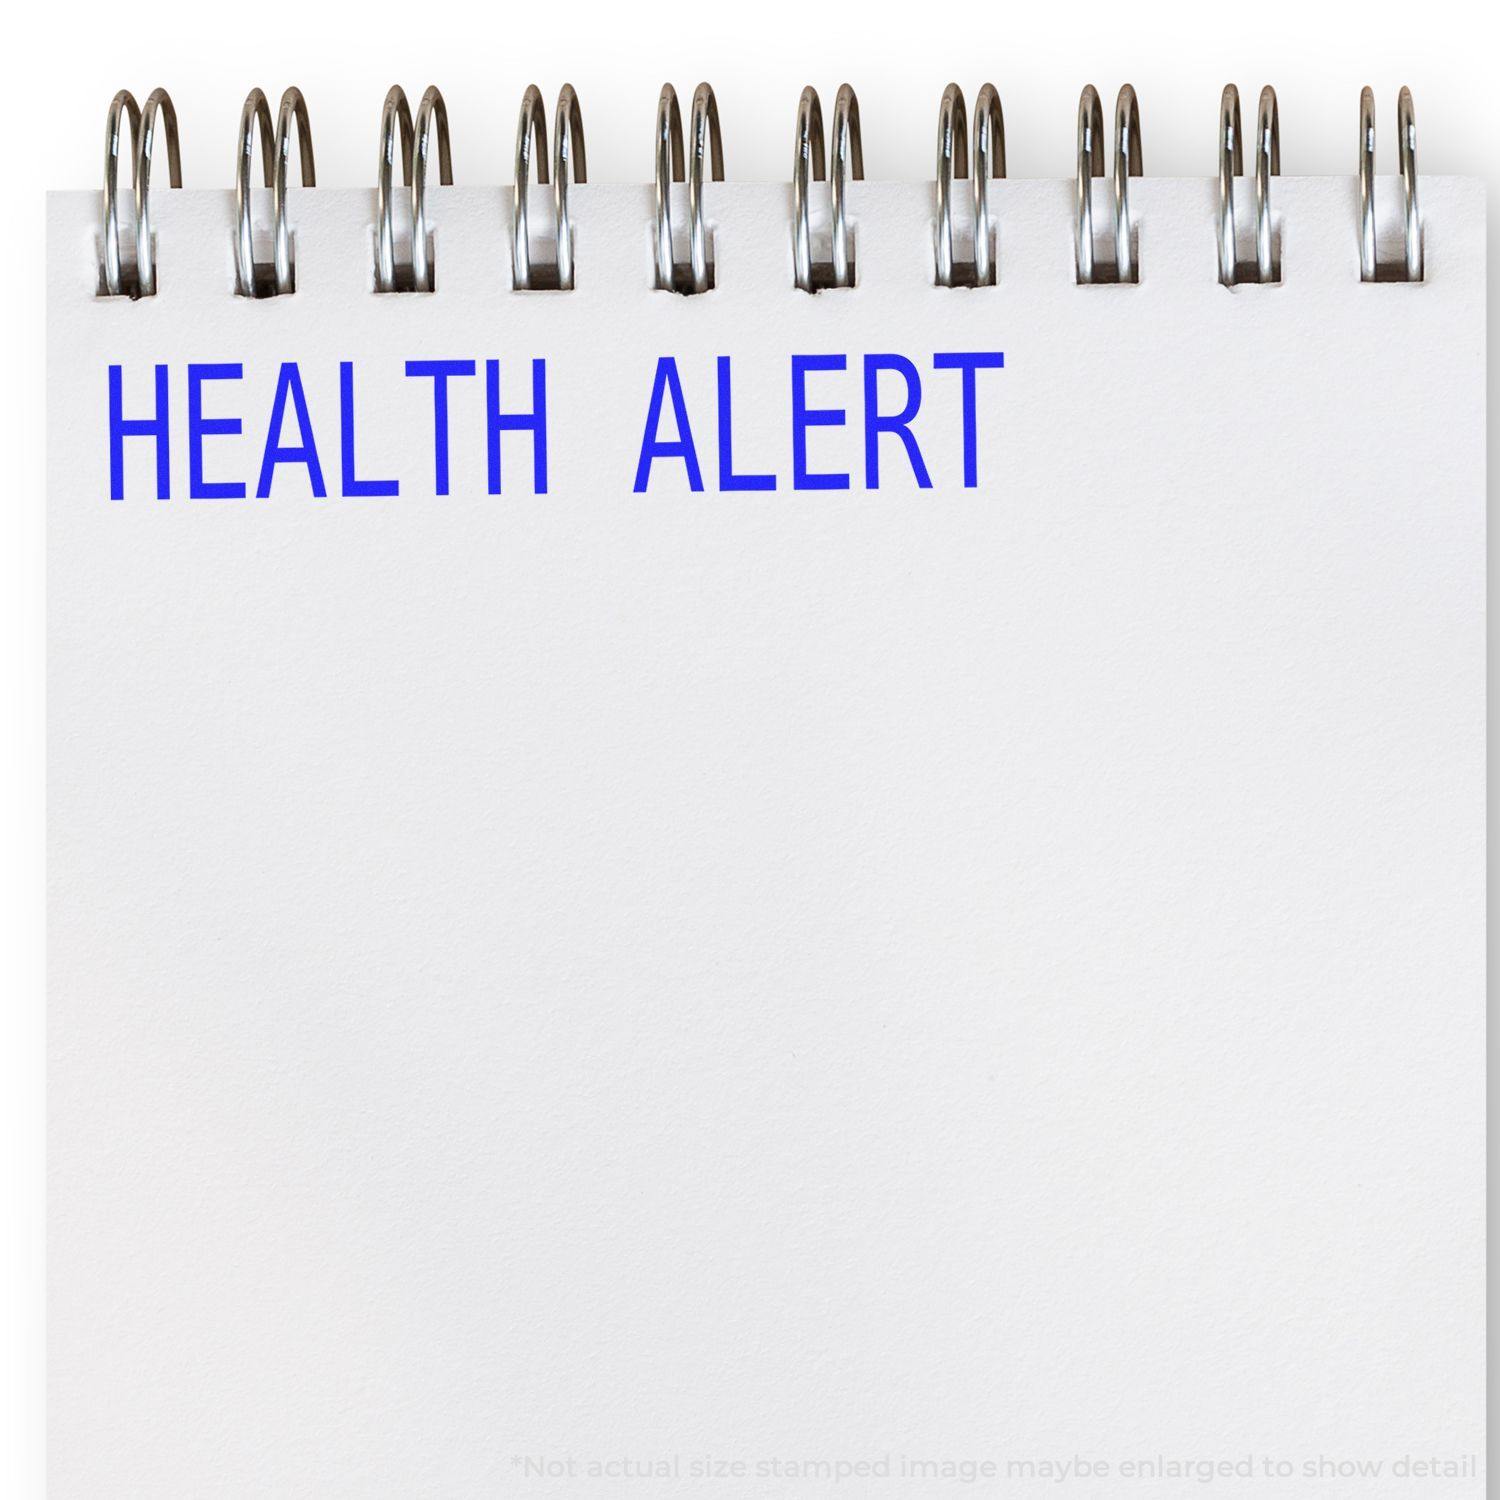 A self-inking stamp with a stamped image showing how the text "HEALTH ALERT" is displayed after stamping.